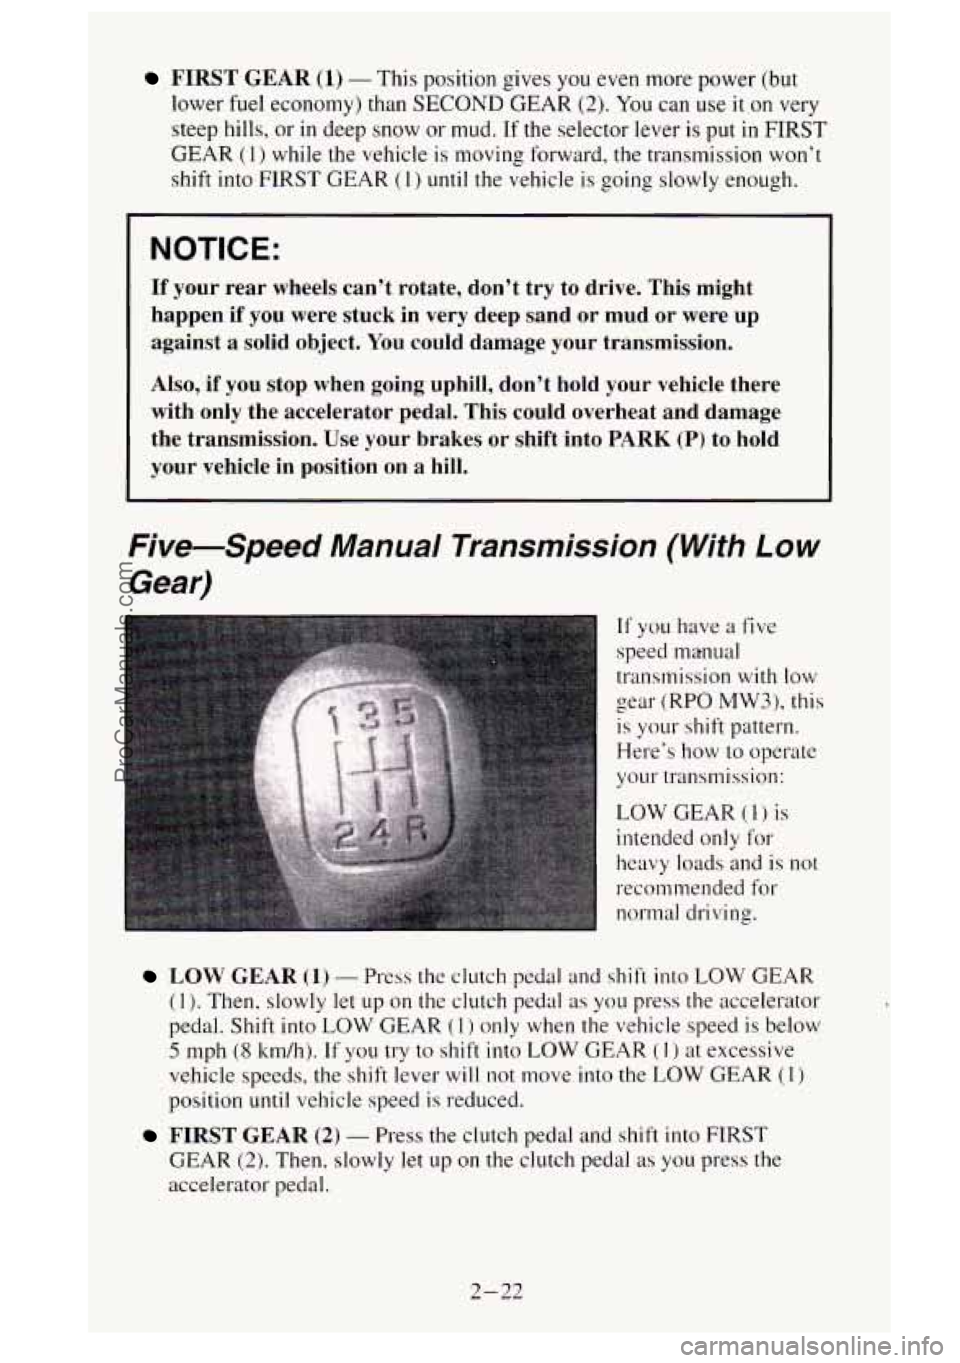 GMC SIERRA 1995  Owners Manual FIRST GEAR (1) - This position  gives you even more power (but 
lower 
fuel economy)  than SECOND GEAR (2). You  can use it on very 
steep hills,  or in deep  snow or mud. If the selector lever  is  p